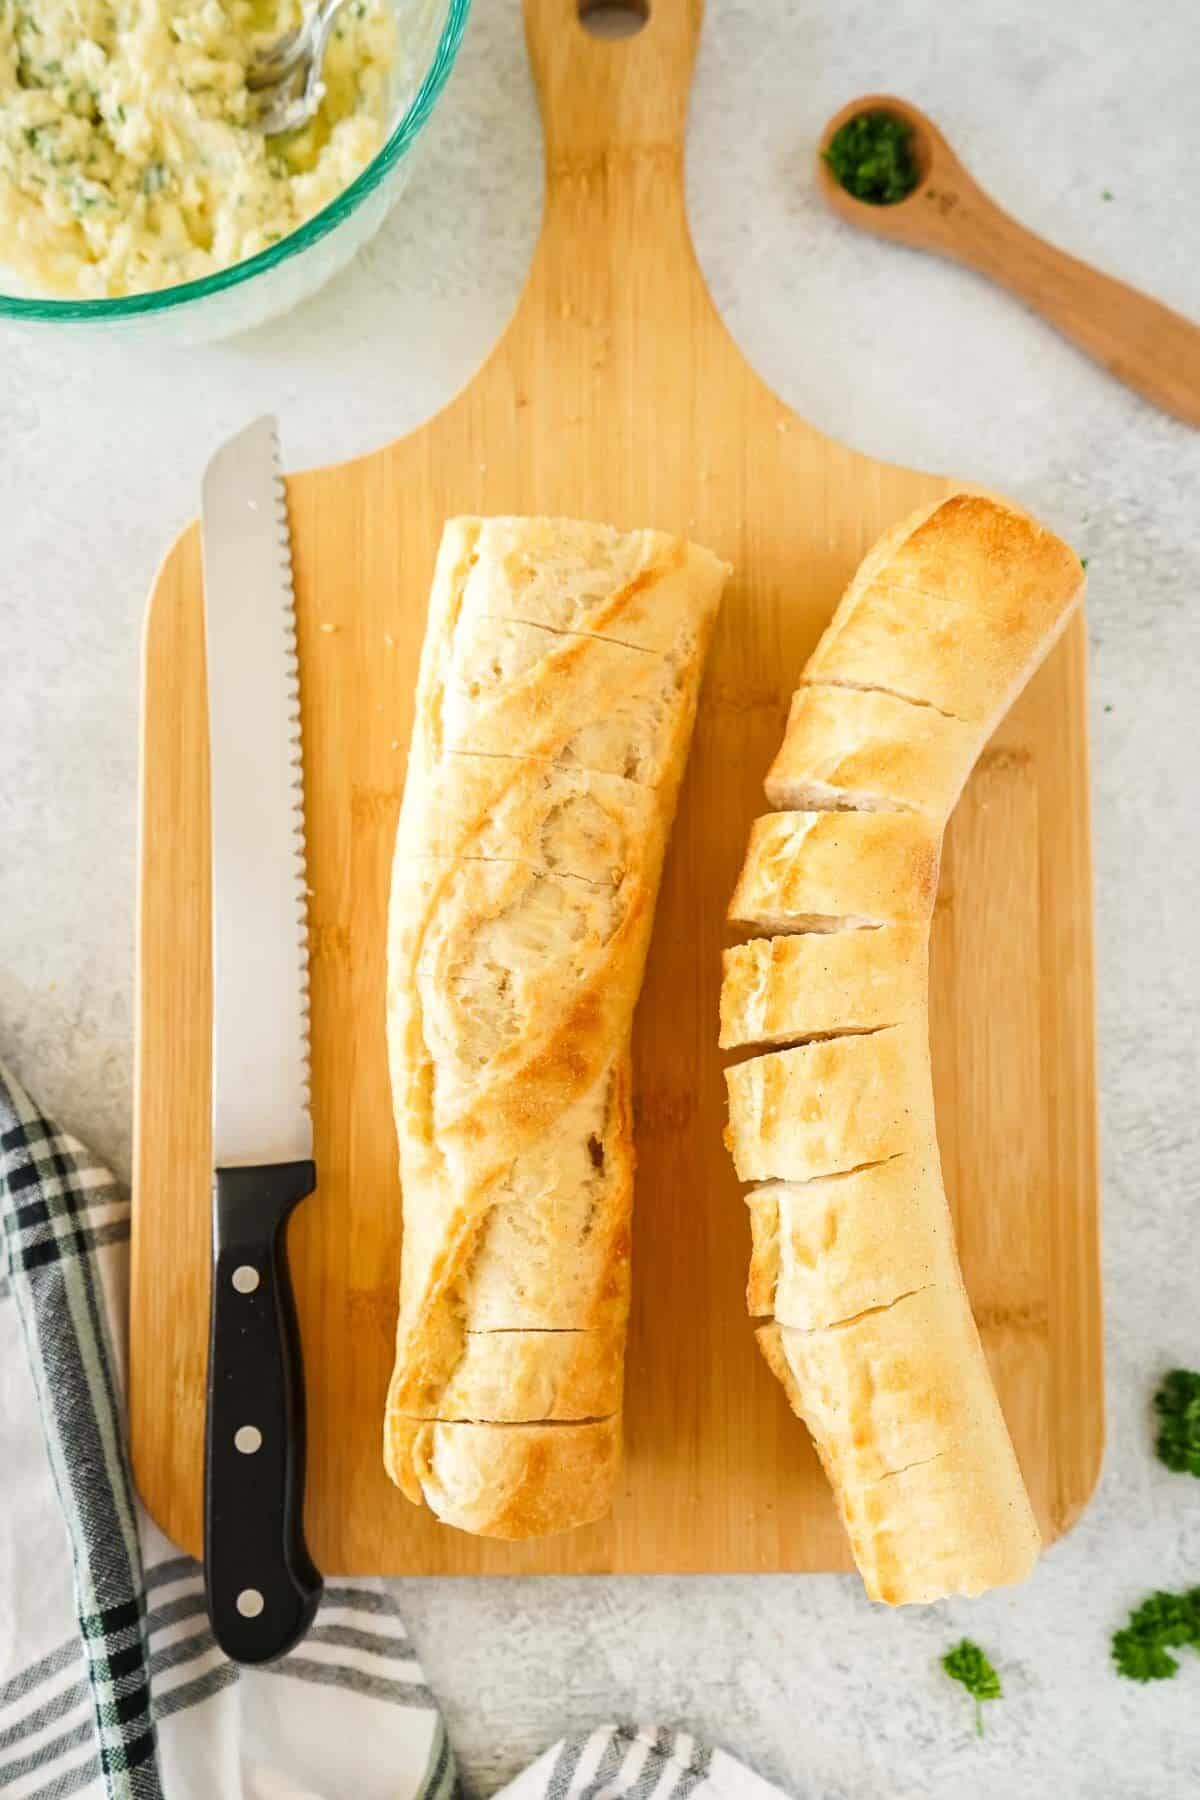 Baguette on a cutting board being sliced.